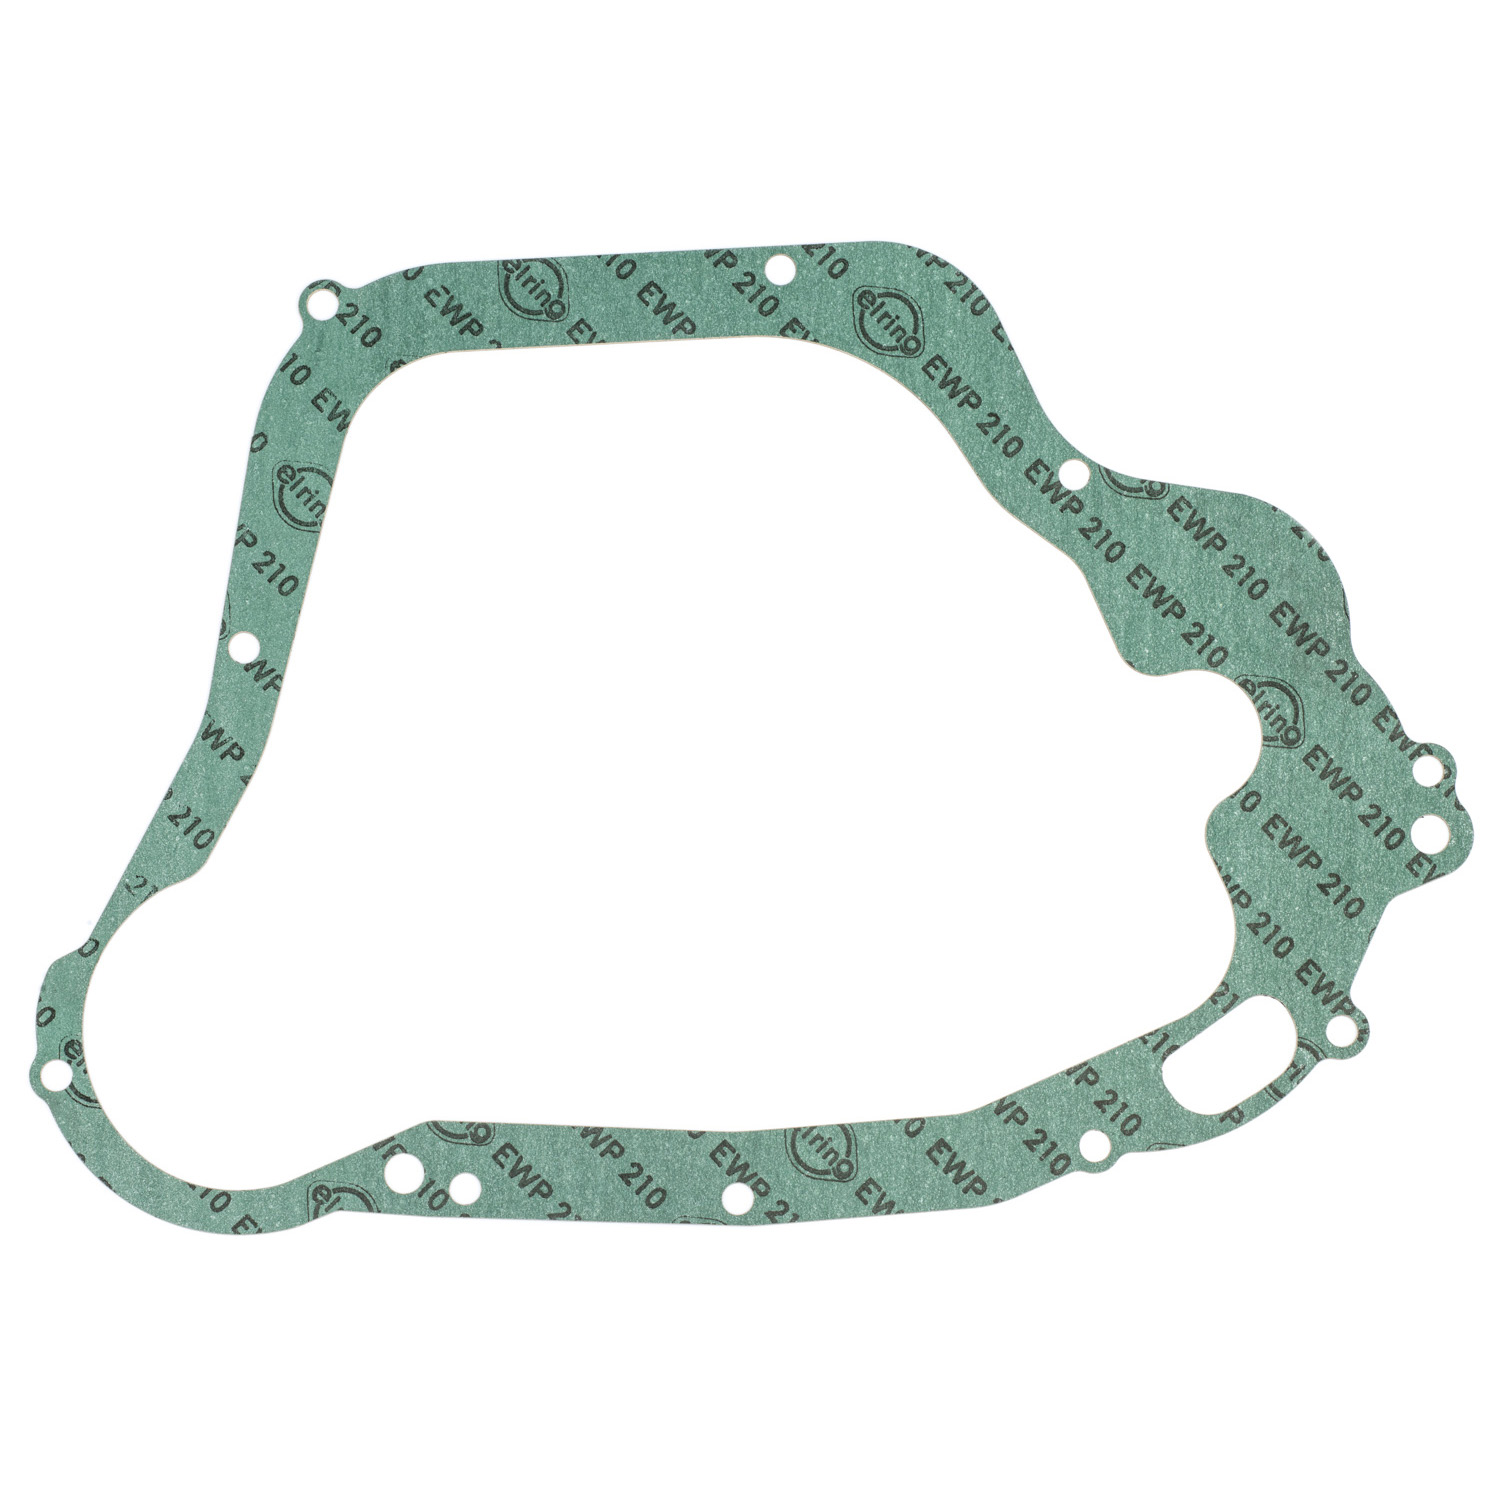 TZR250R Clutch Cover Gasket